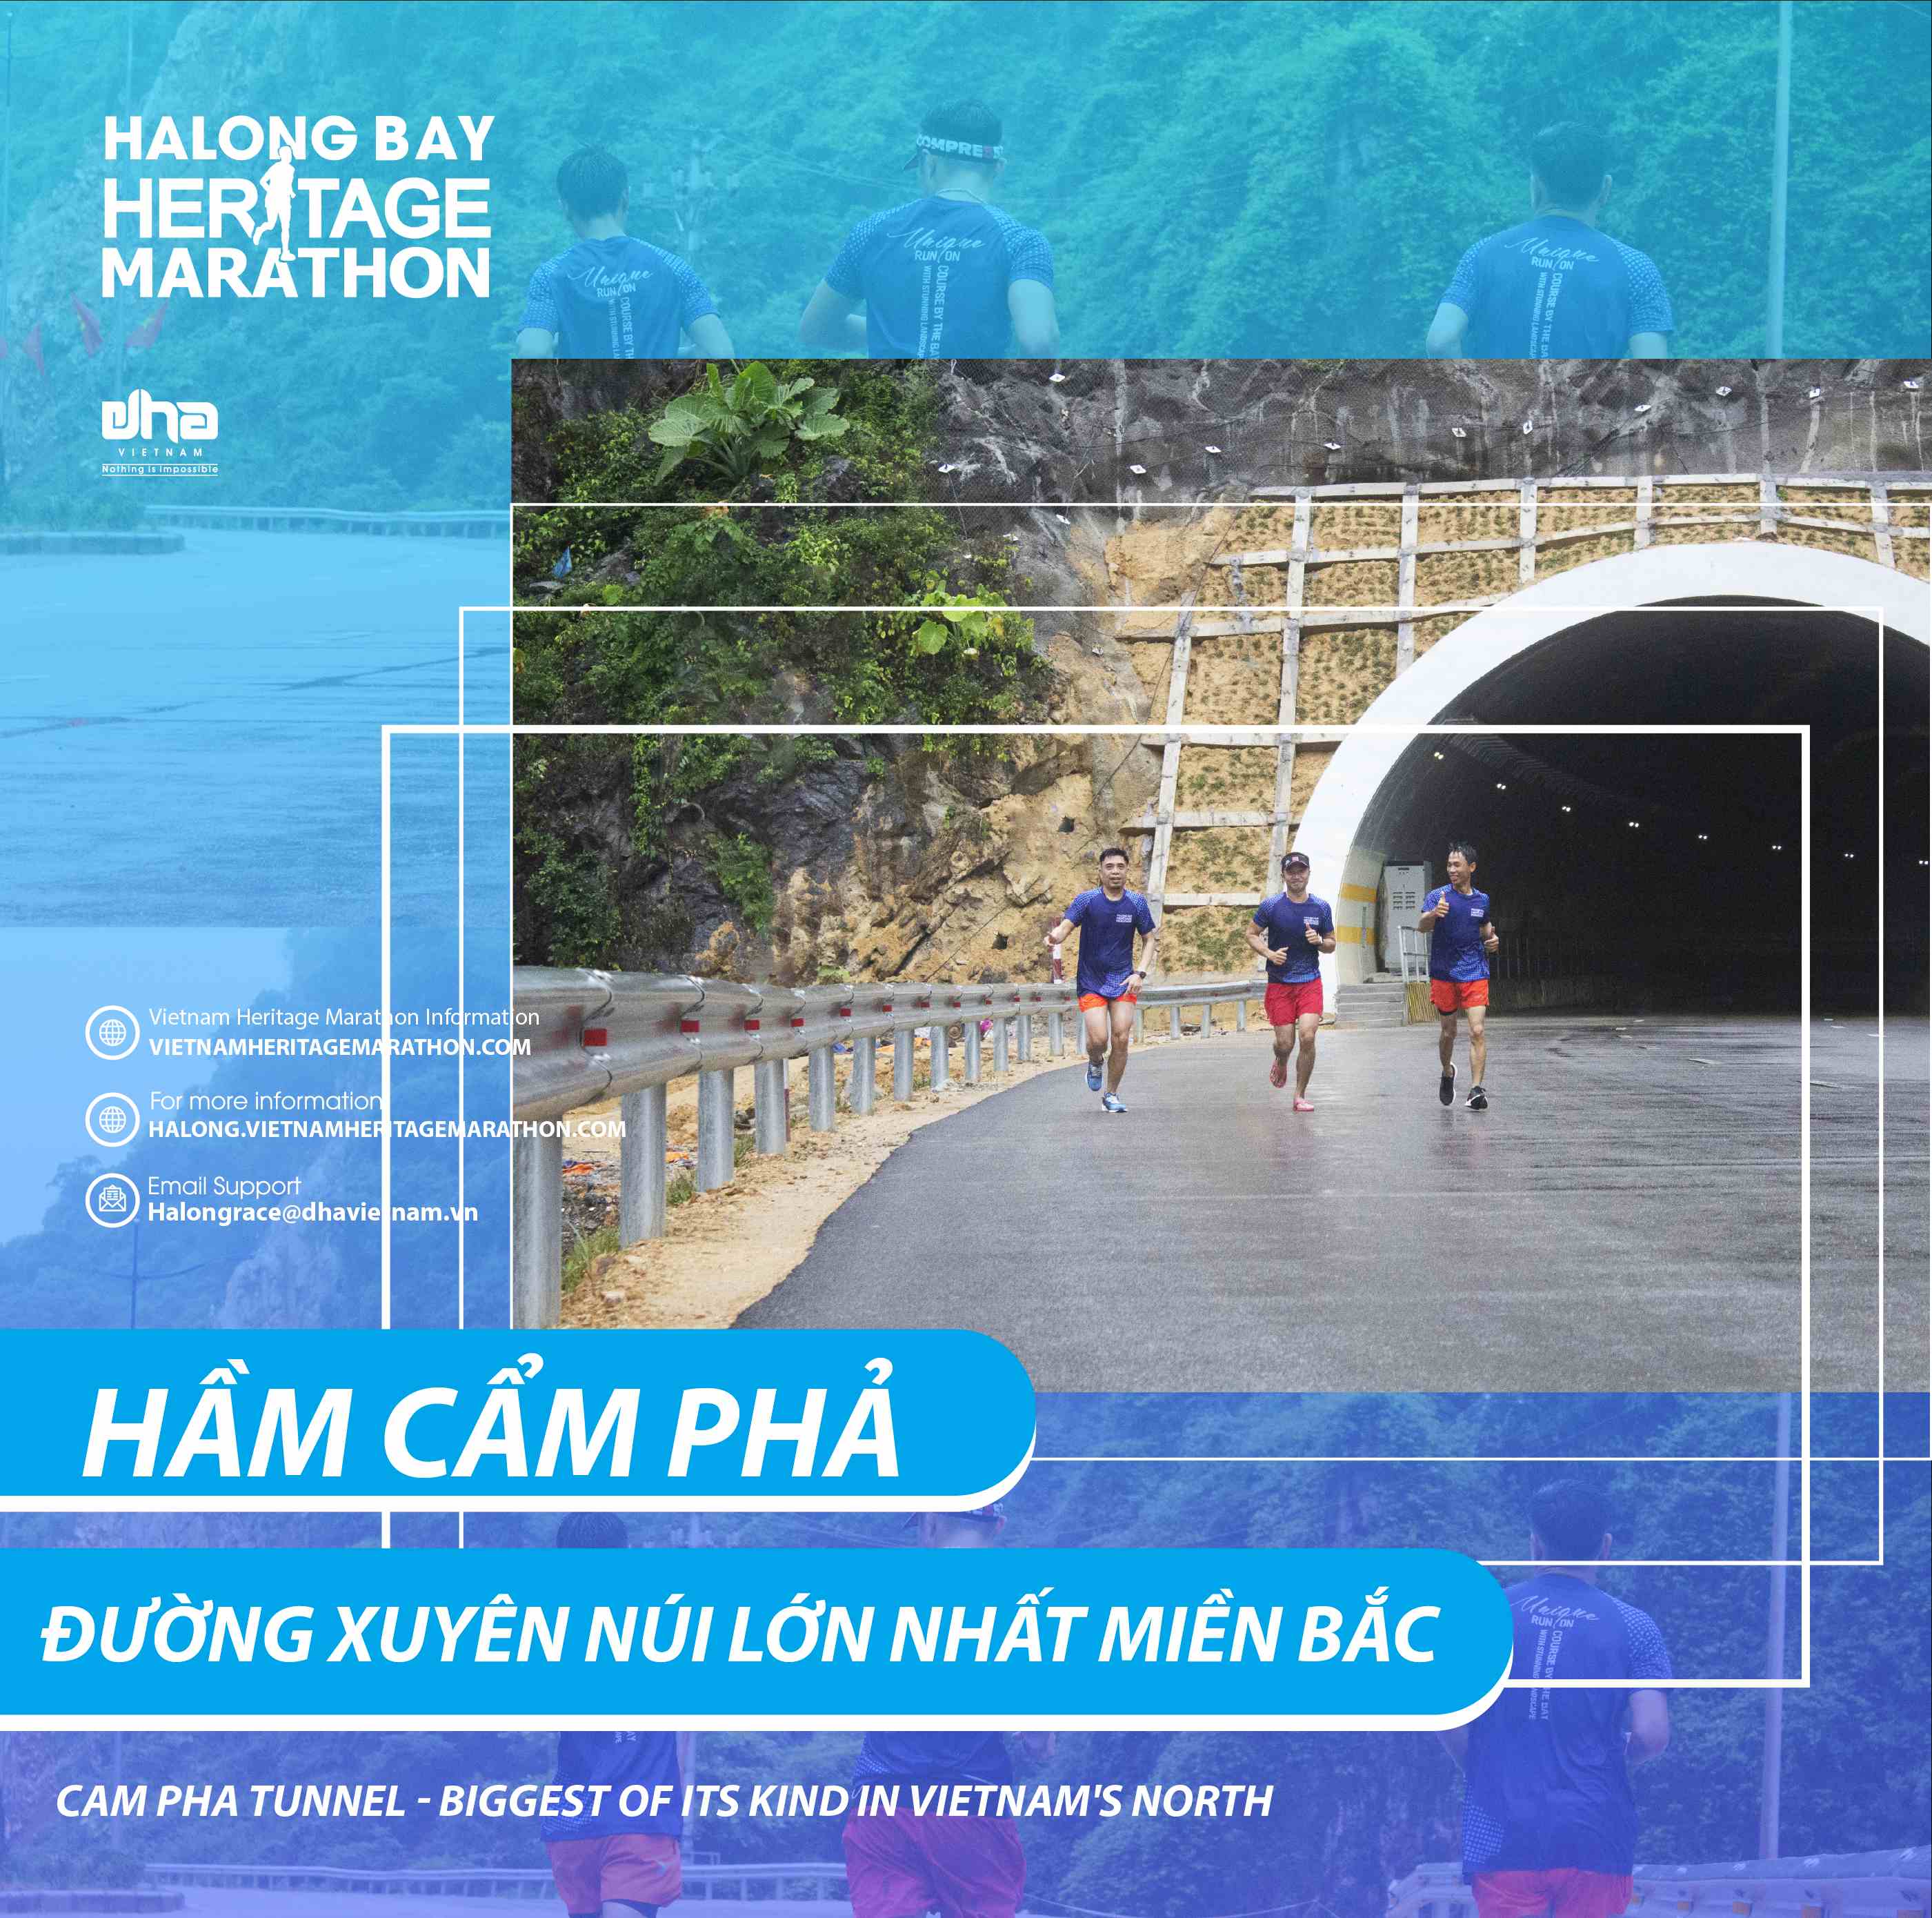 Cam Pha Tunnel, The Biggest Mountain Tunnel In Vietnam's North